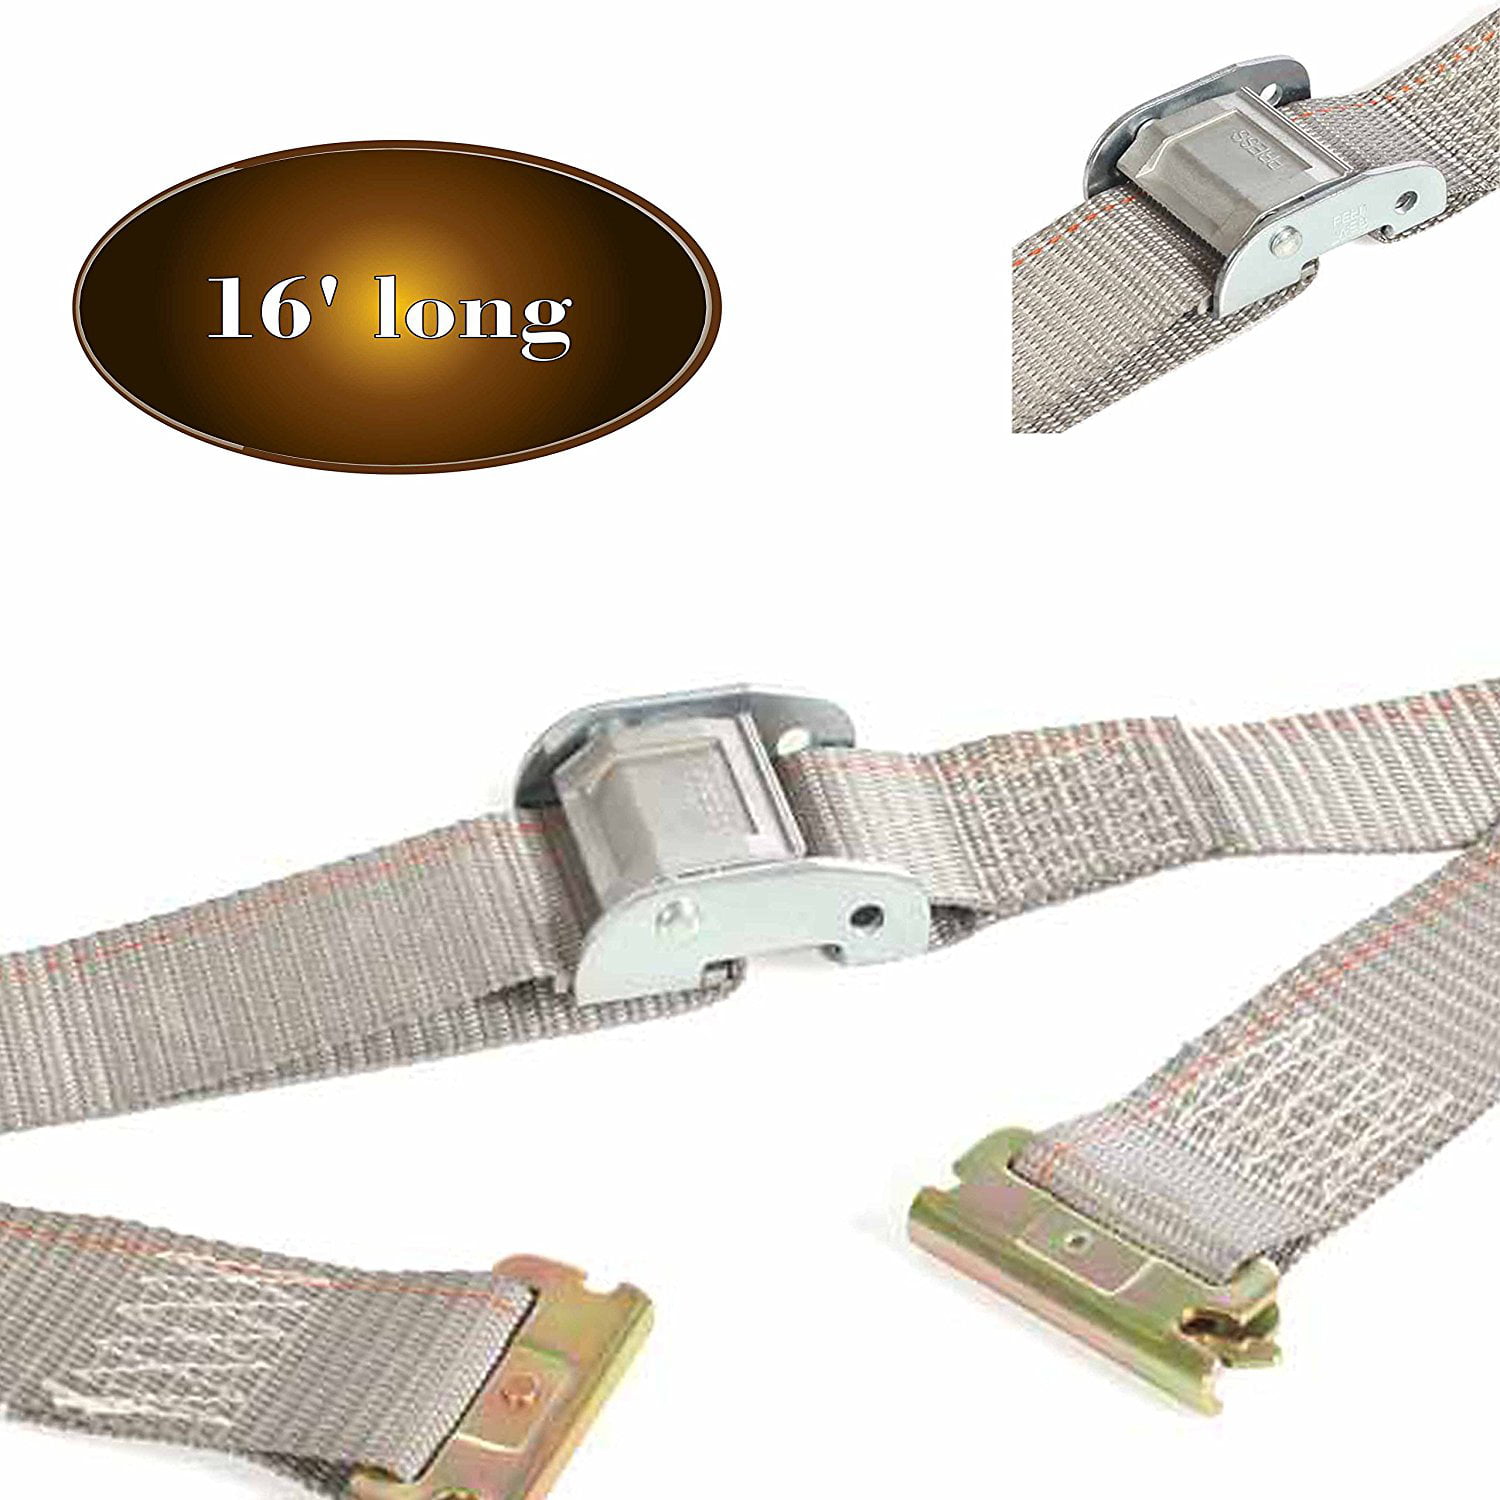 Load Securement in Box Truck E Track O Ring D Ring Tie Down Anchors for ETrack Cargo Straps SGT KNOTS Triangle Ring - 10 Pack Tiedown Rail Spring Loaded E-Track Clip ETrack Accessories 